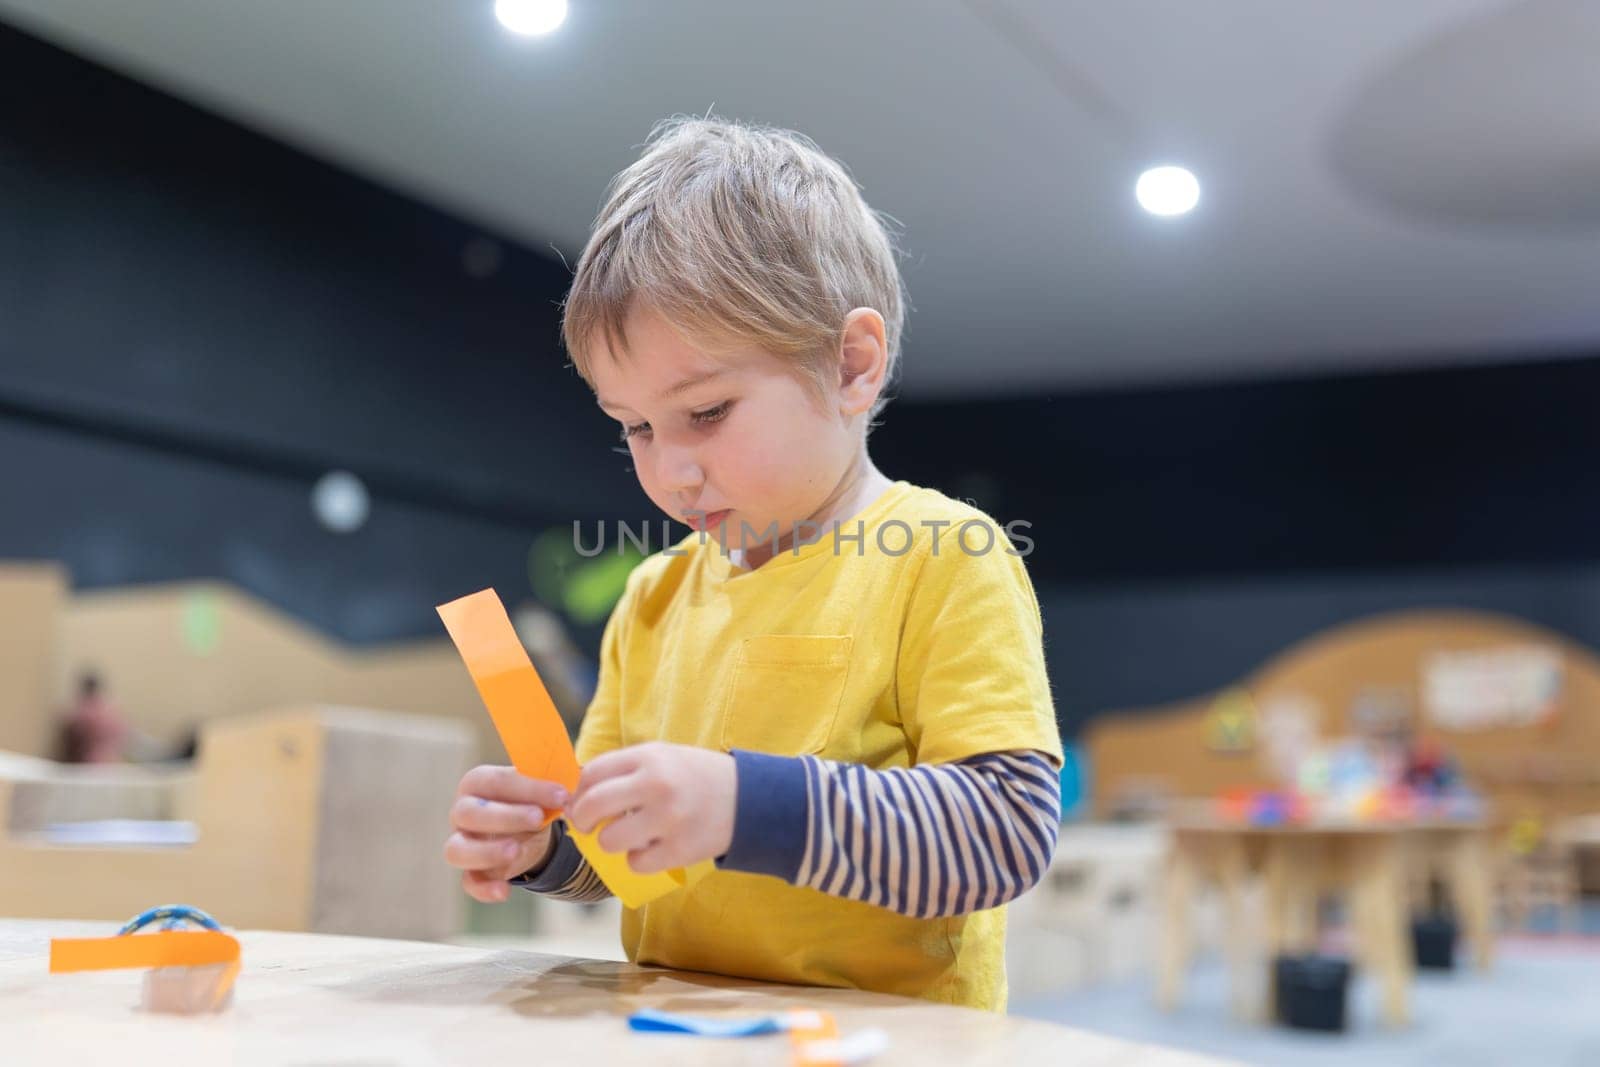 A young boy is sitting at a table with a piece of paper in his hand. He is focused on cutting the paper with scissors. The scene suggests a moment of concentration and creativity